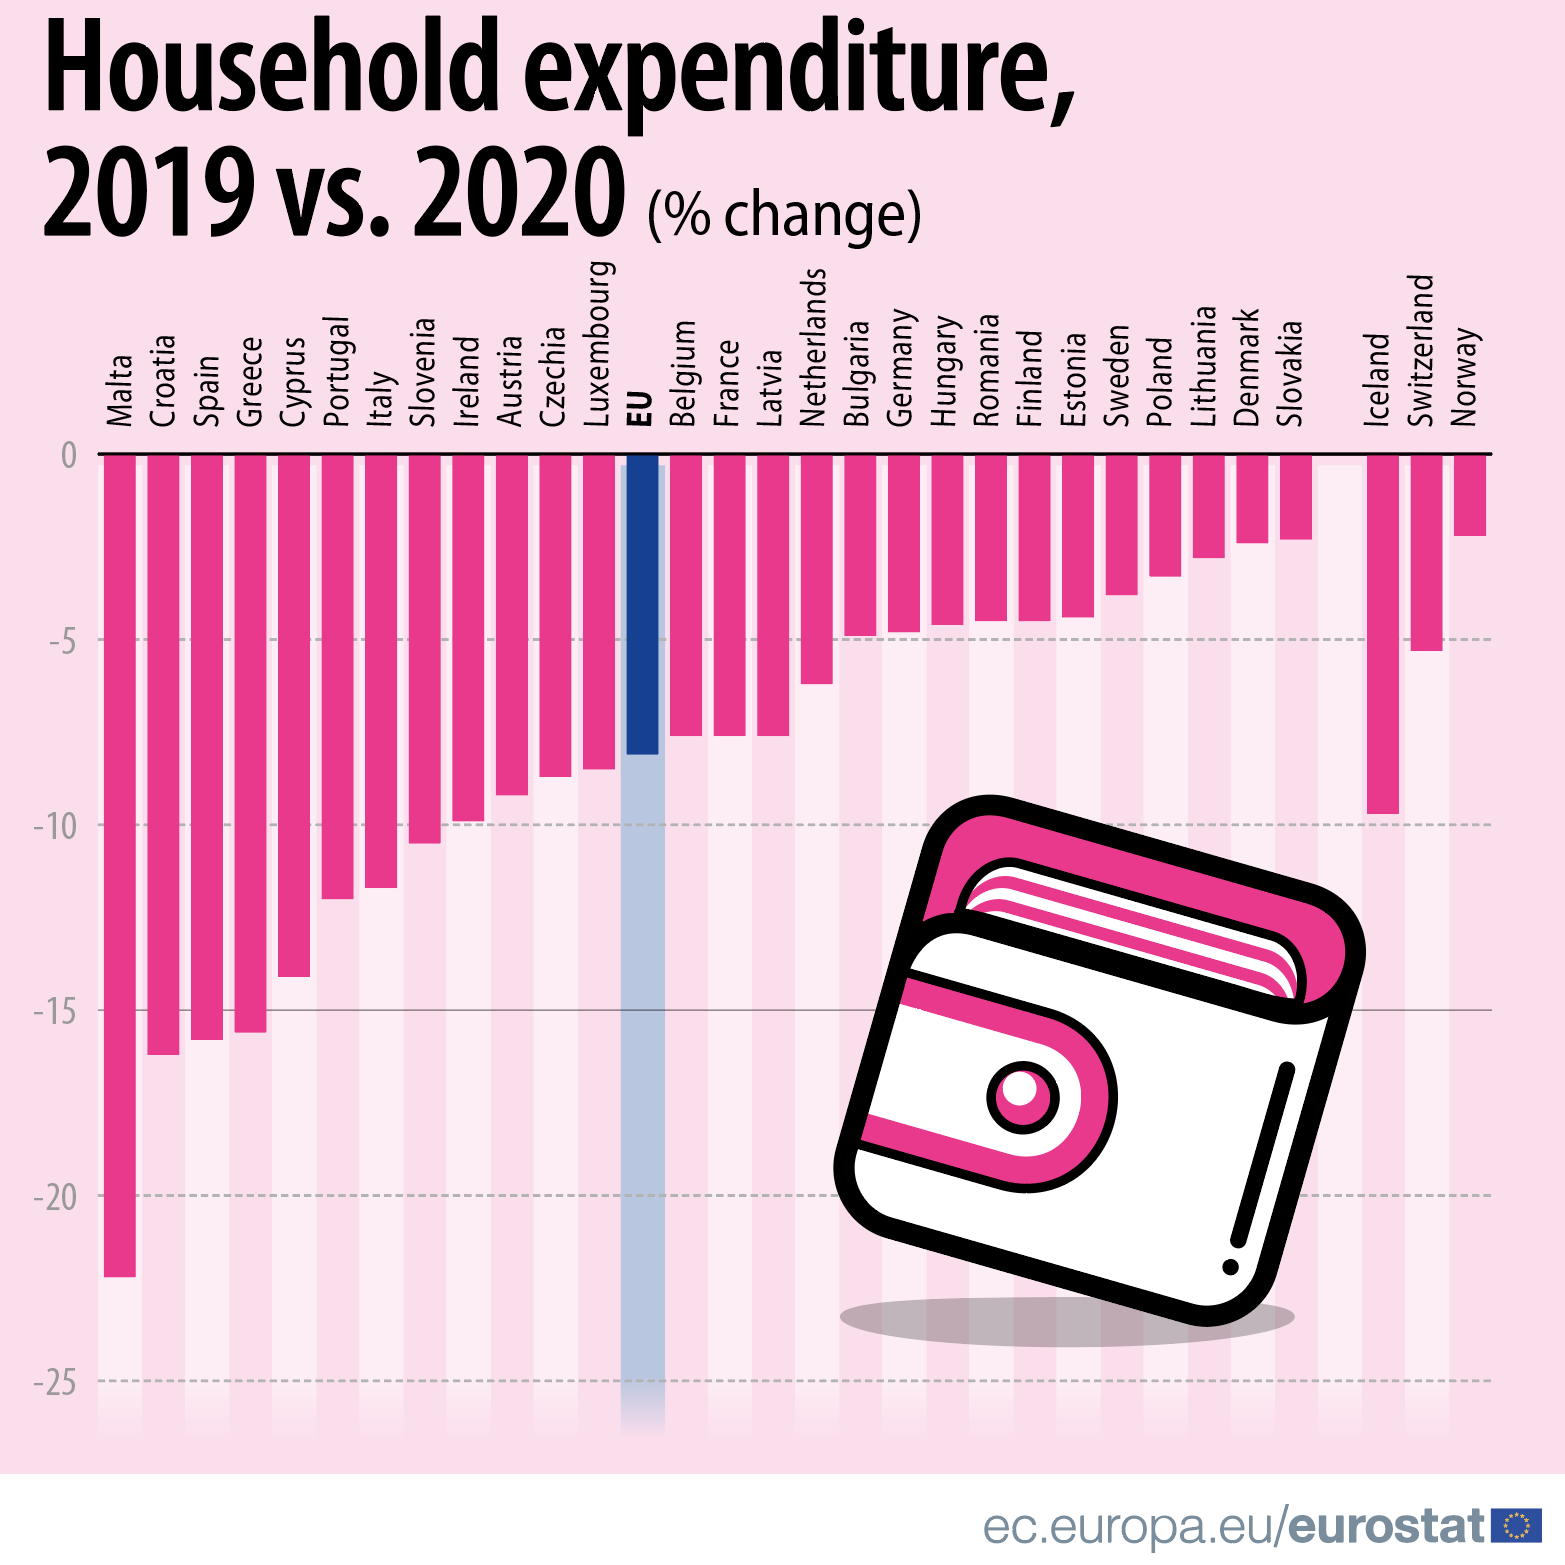 Bar graph: Household expenditure 2019 vs 2020 in the EU MS and EFTA countries, % change